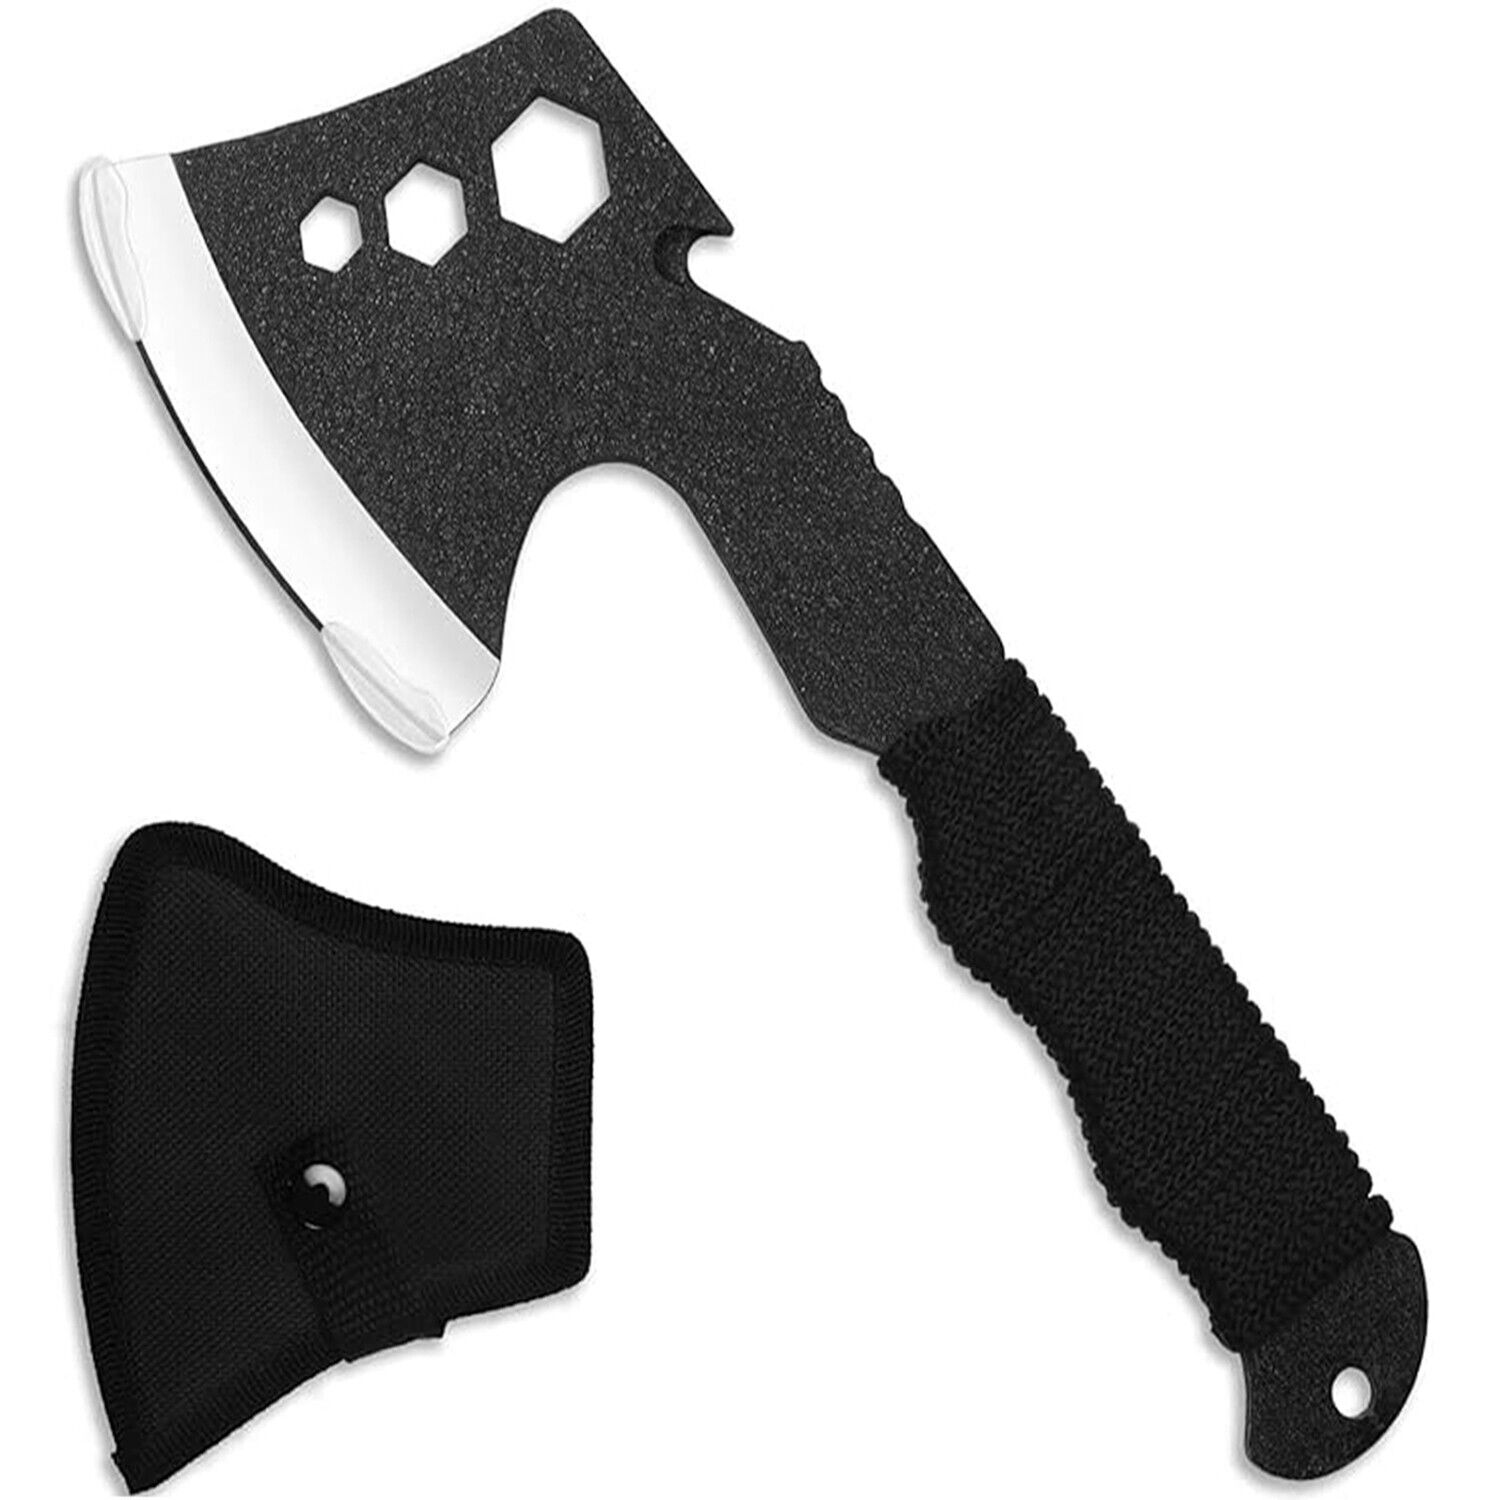 Multifunctional Axe 10 Inch Camping Survival Tactical Hatchet Outdoor Hunting